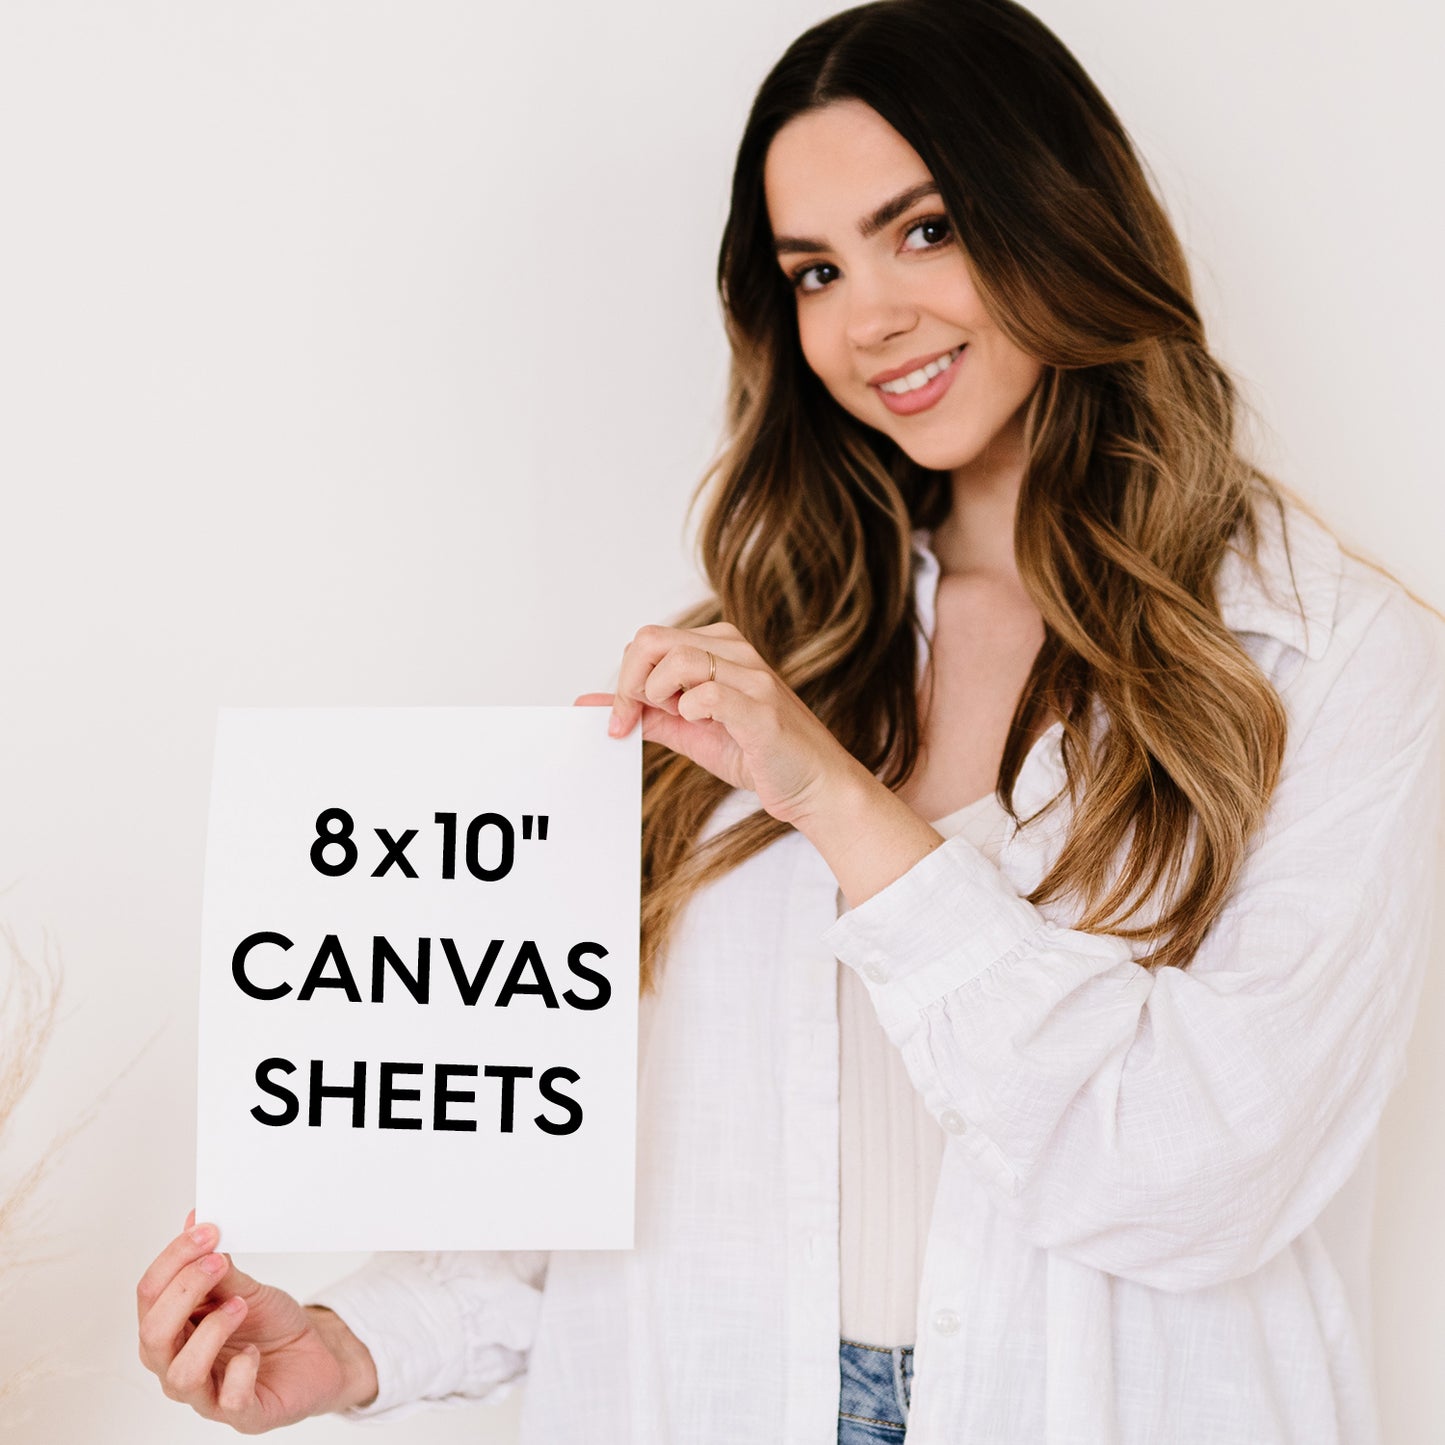 5x7 Blank Canvas Sheets - Unstretched 100% Cotton Flat Canvas